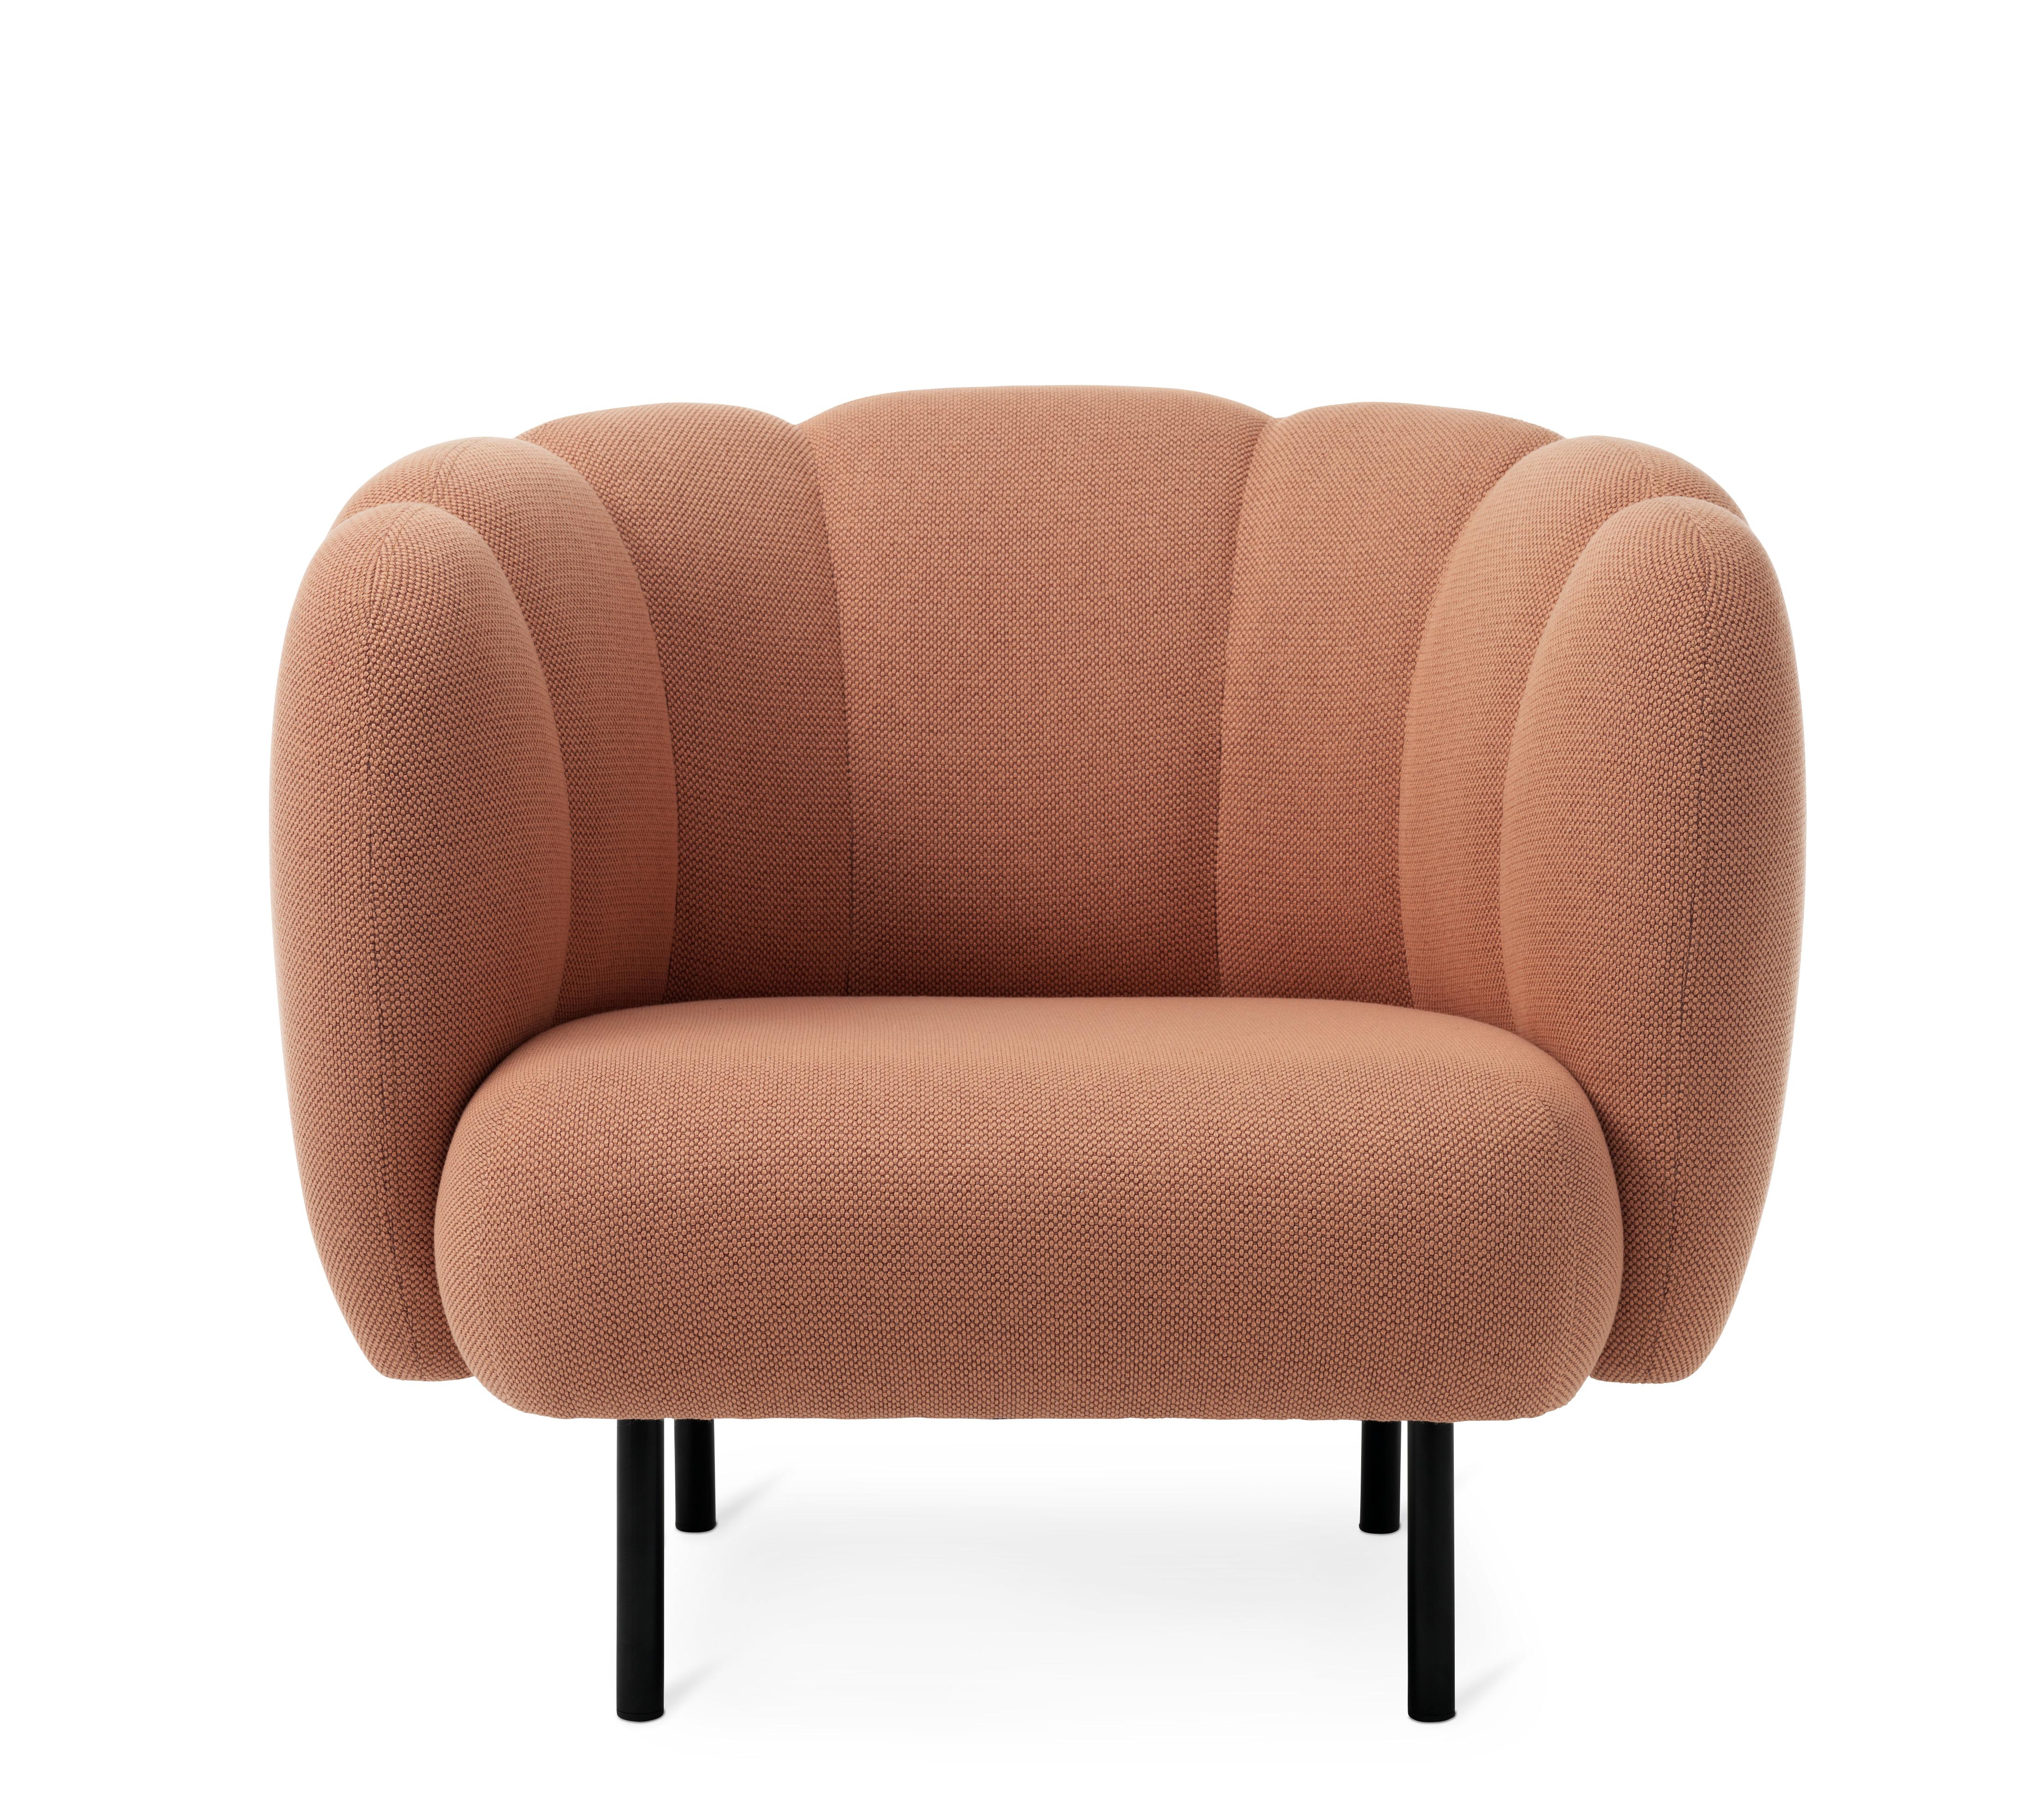 For Sale: Pink (Merit 035) Cape Lounge Chair with Stitches, by Charlotte Høncke from Warm Nordic